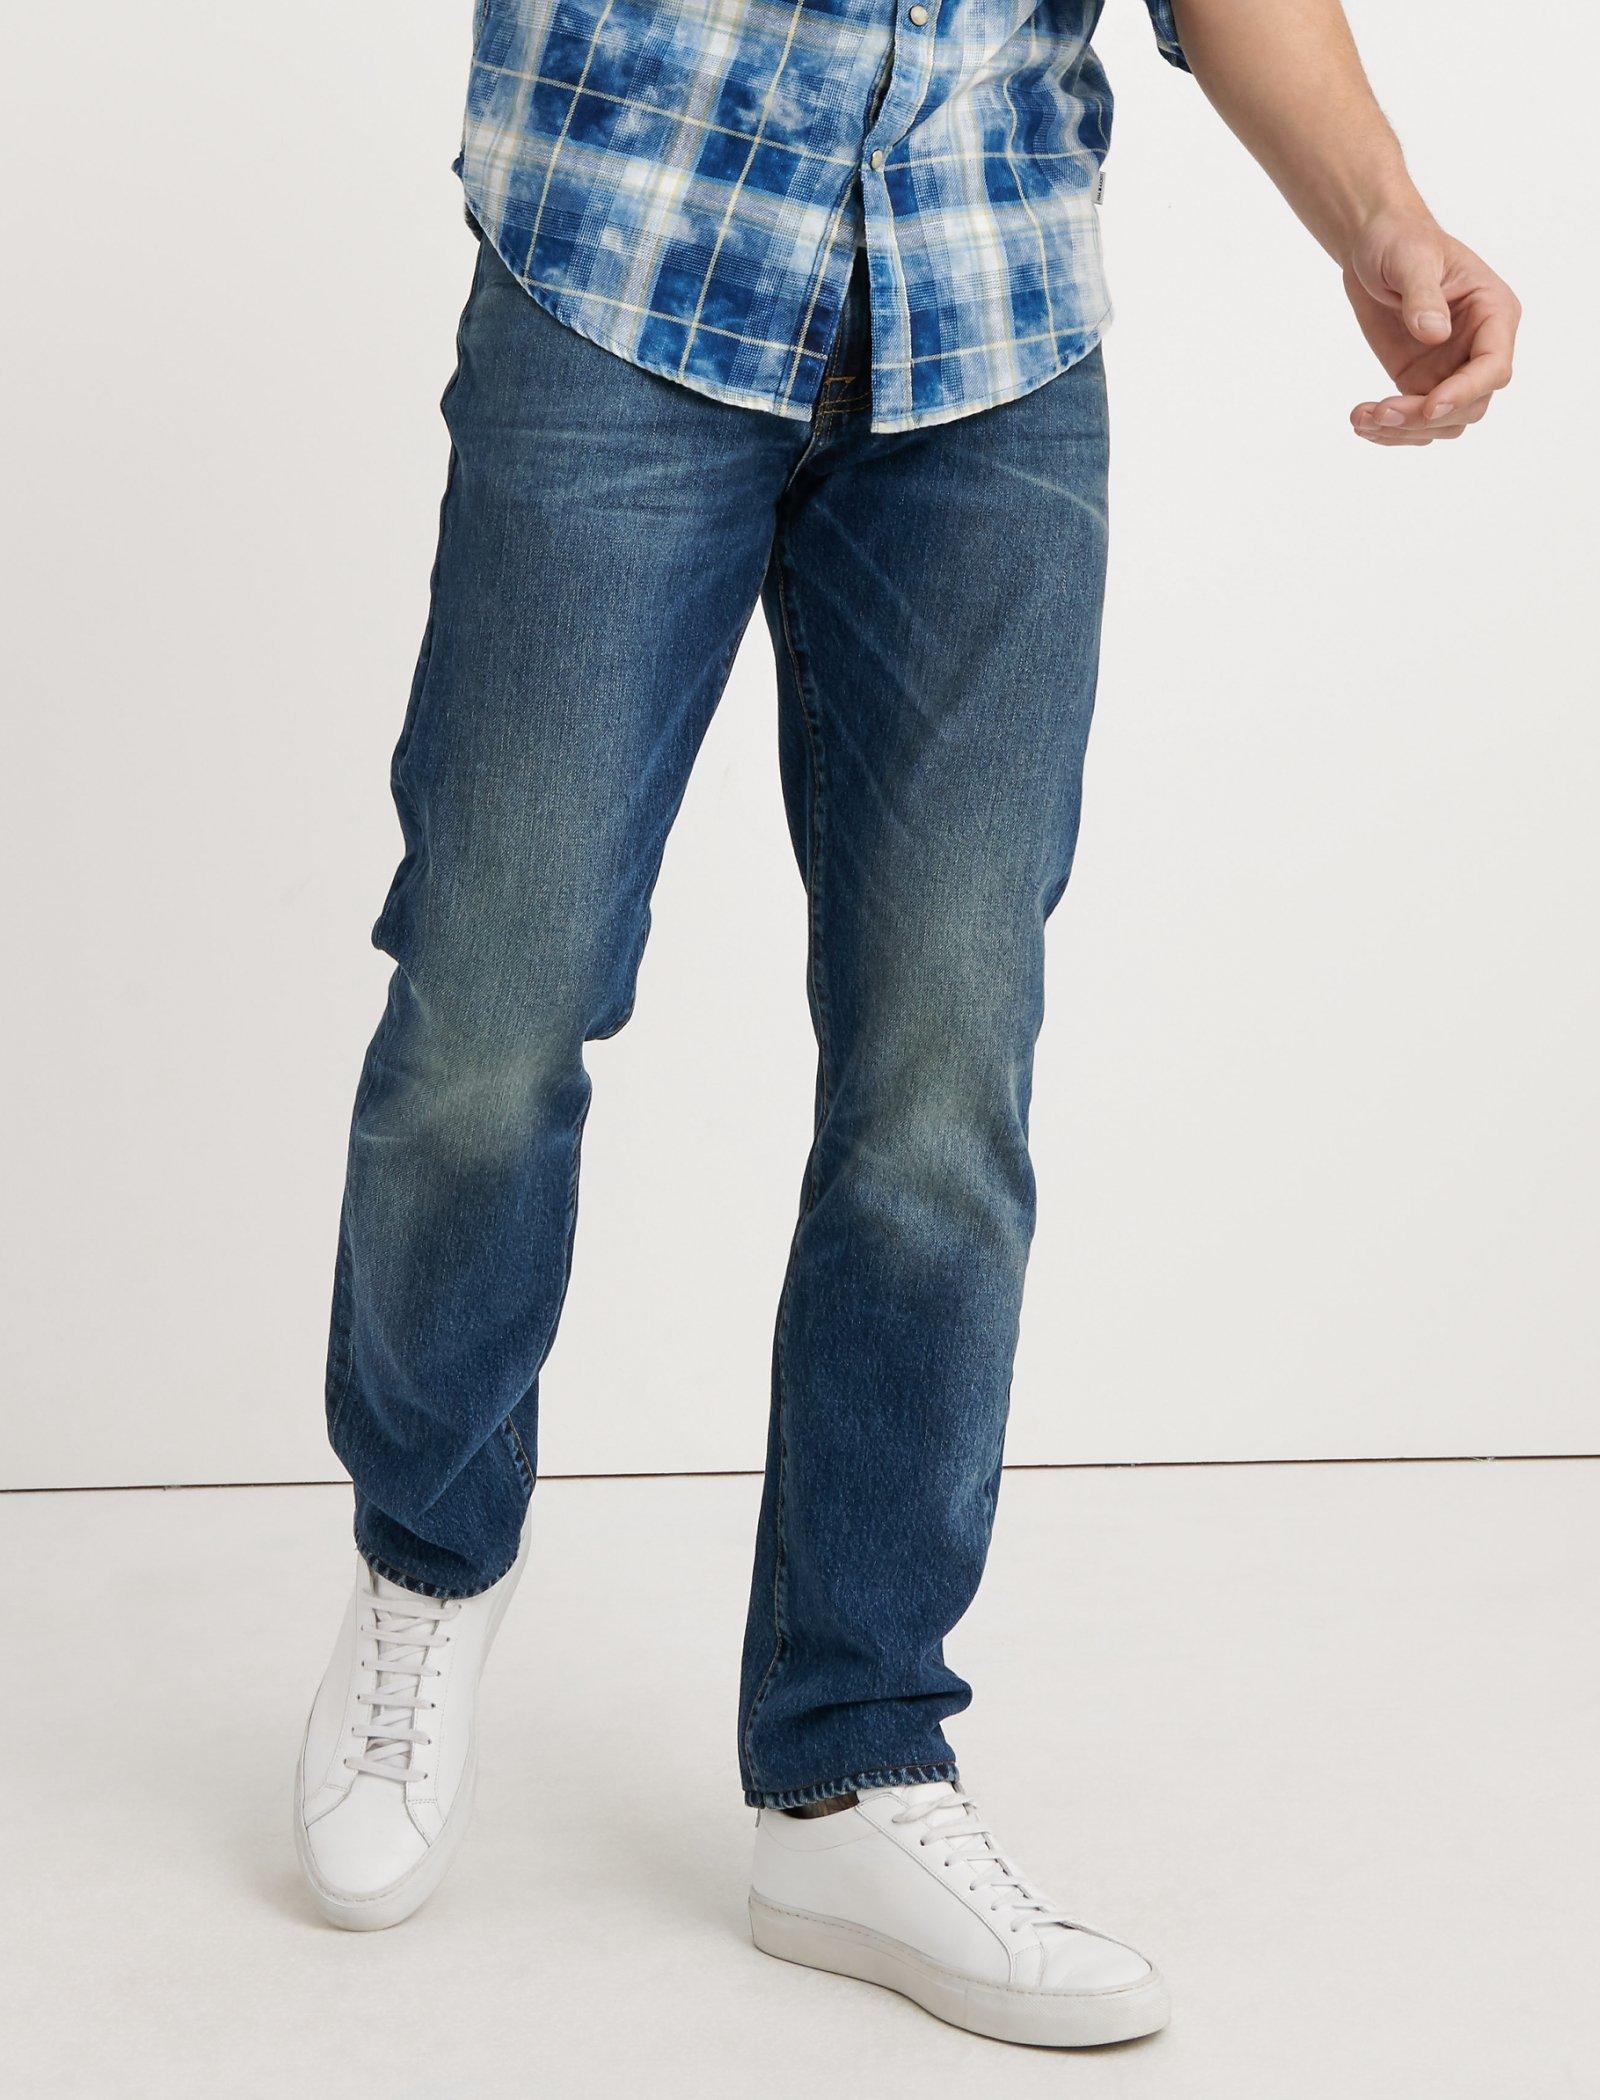 lucky brand athletic slim jeans